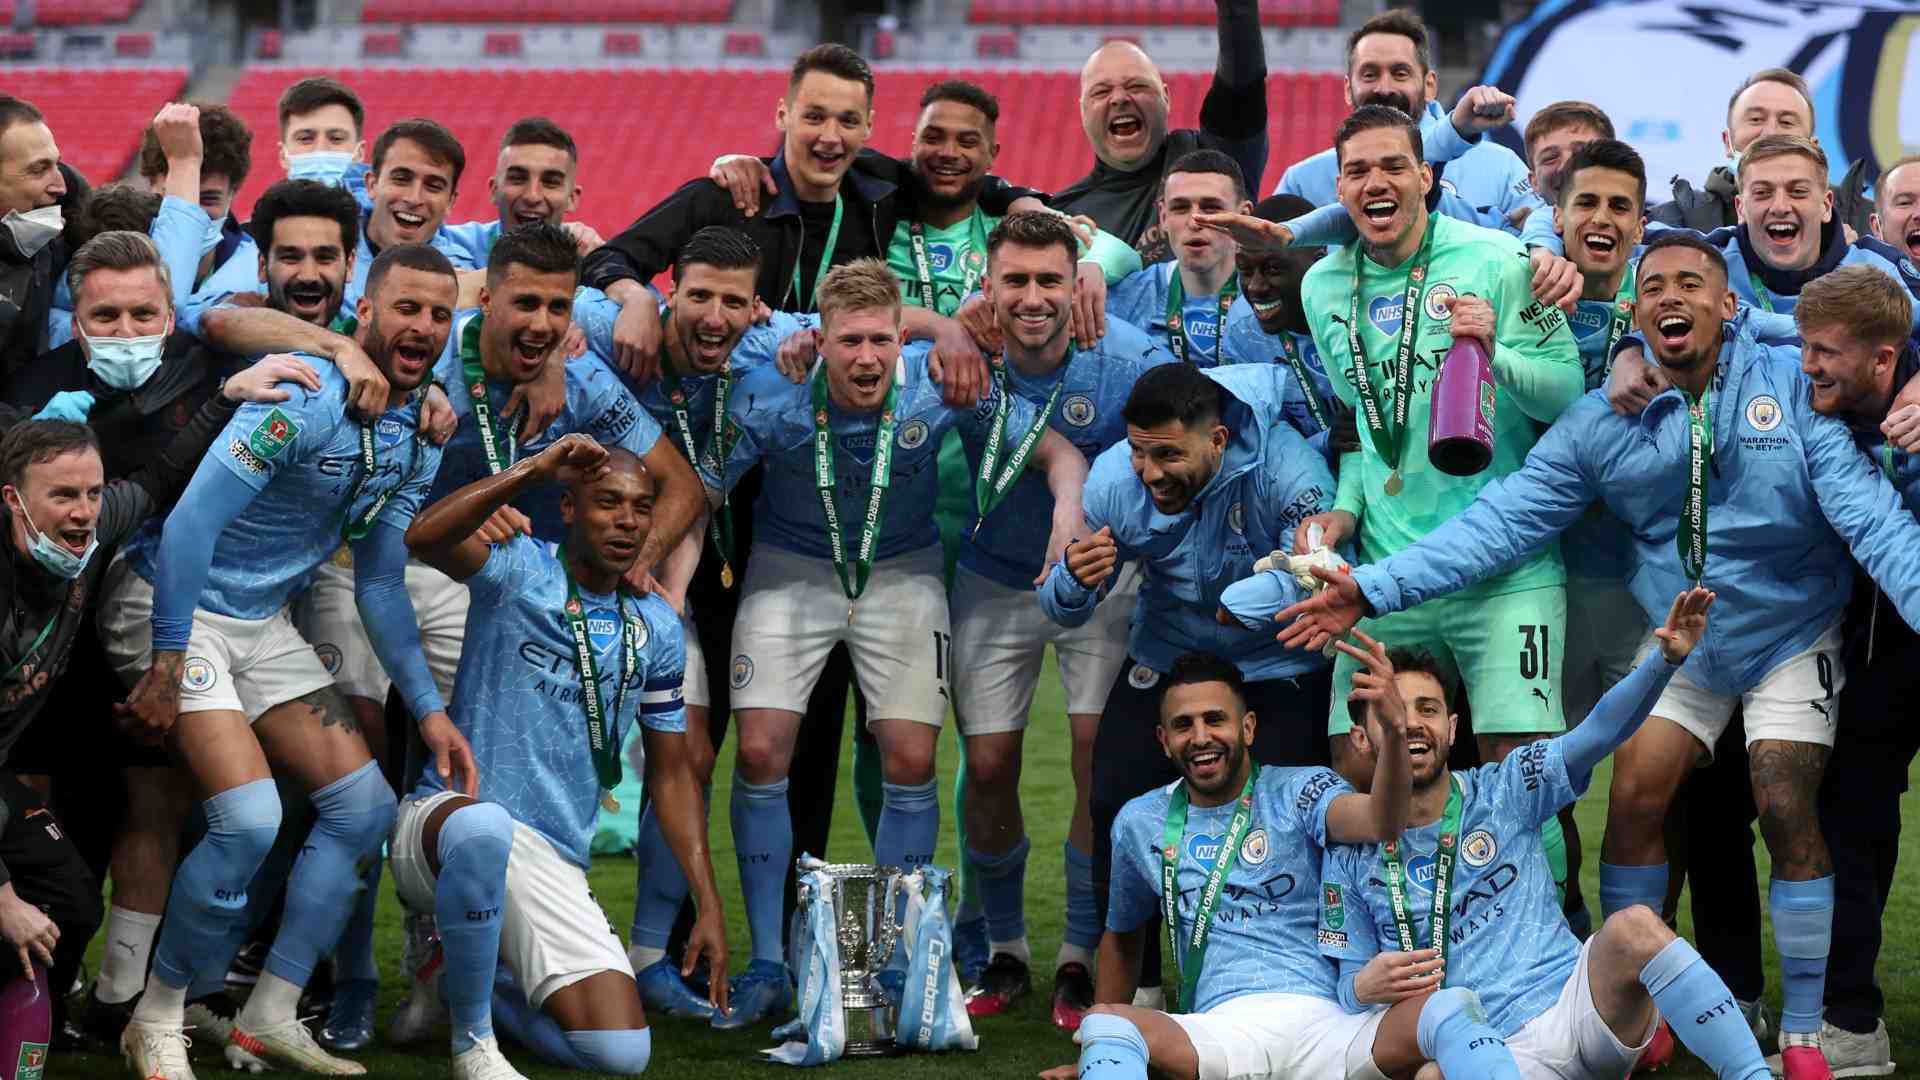 Manchester City celebrate winning the Carabao Cup. (Image: Twitter/@ManCity)